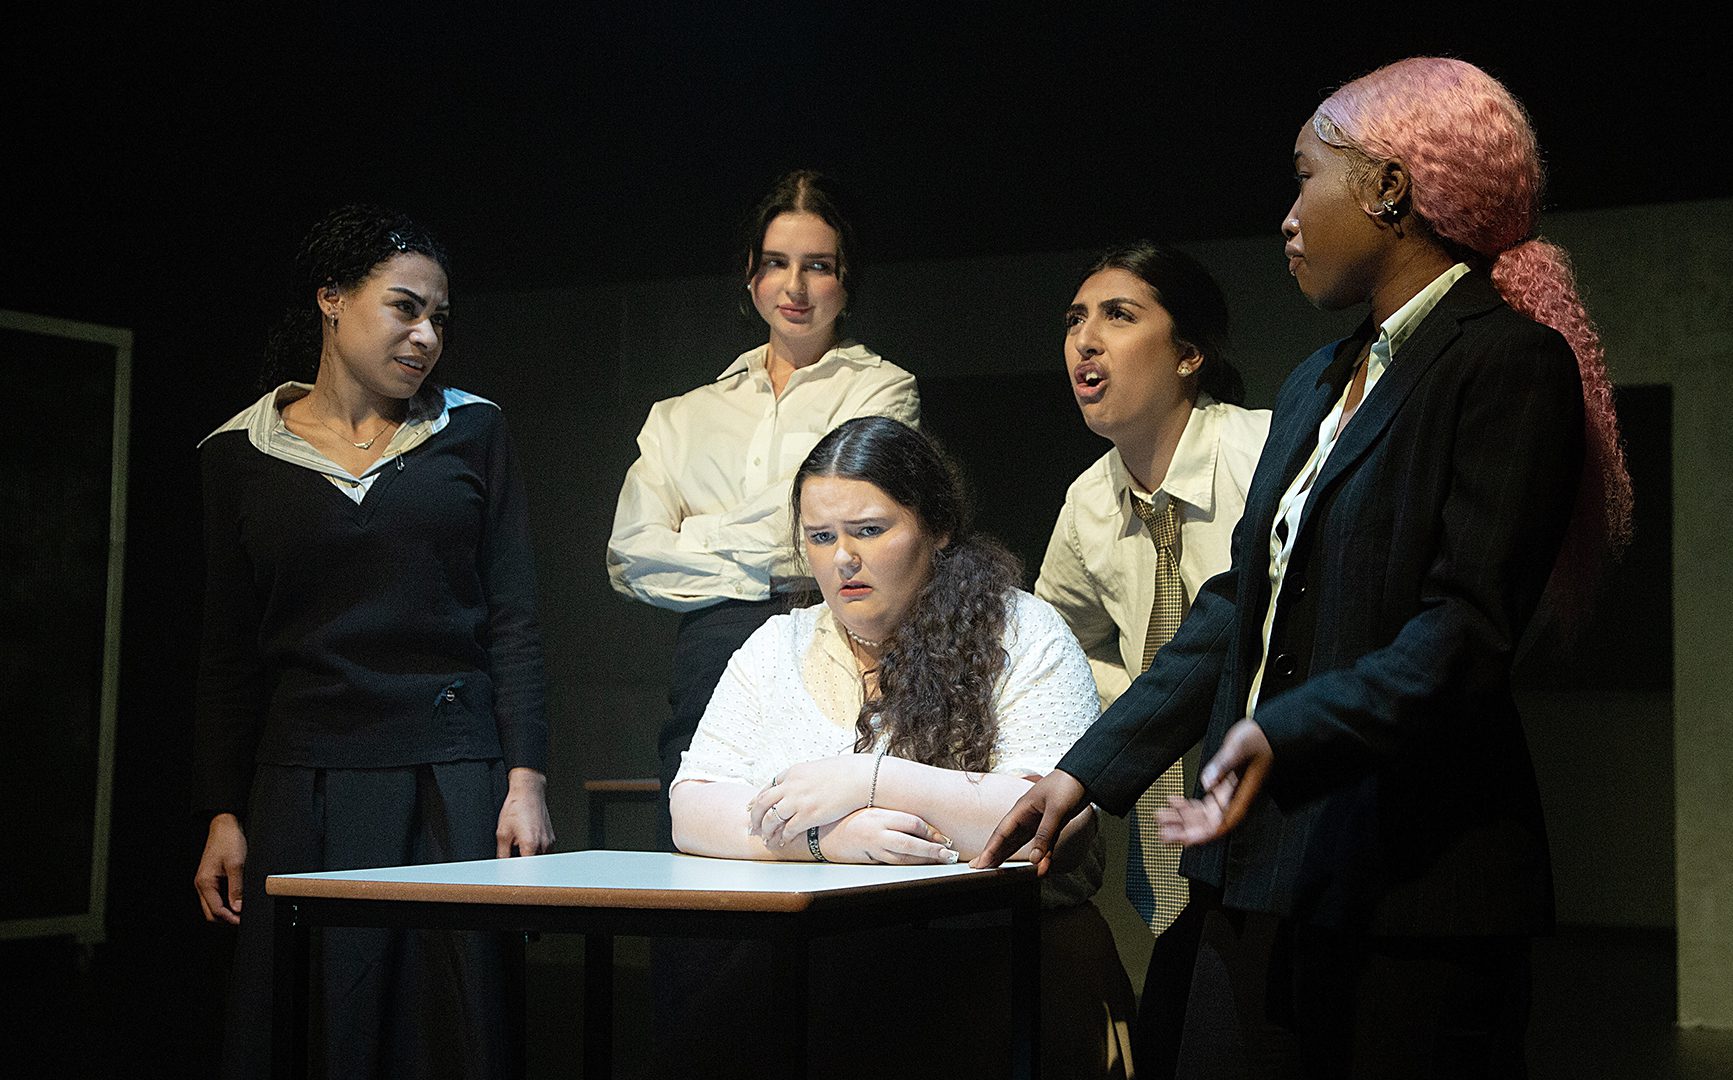 Performing Arts students show ‘maturity and depth’ in production of Machinal